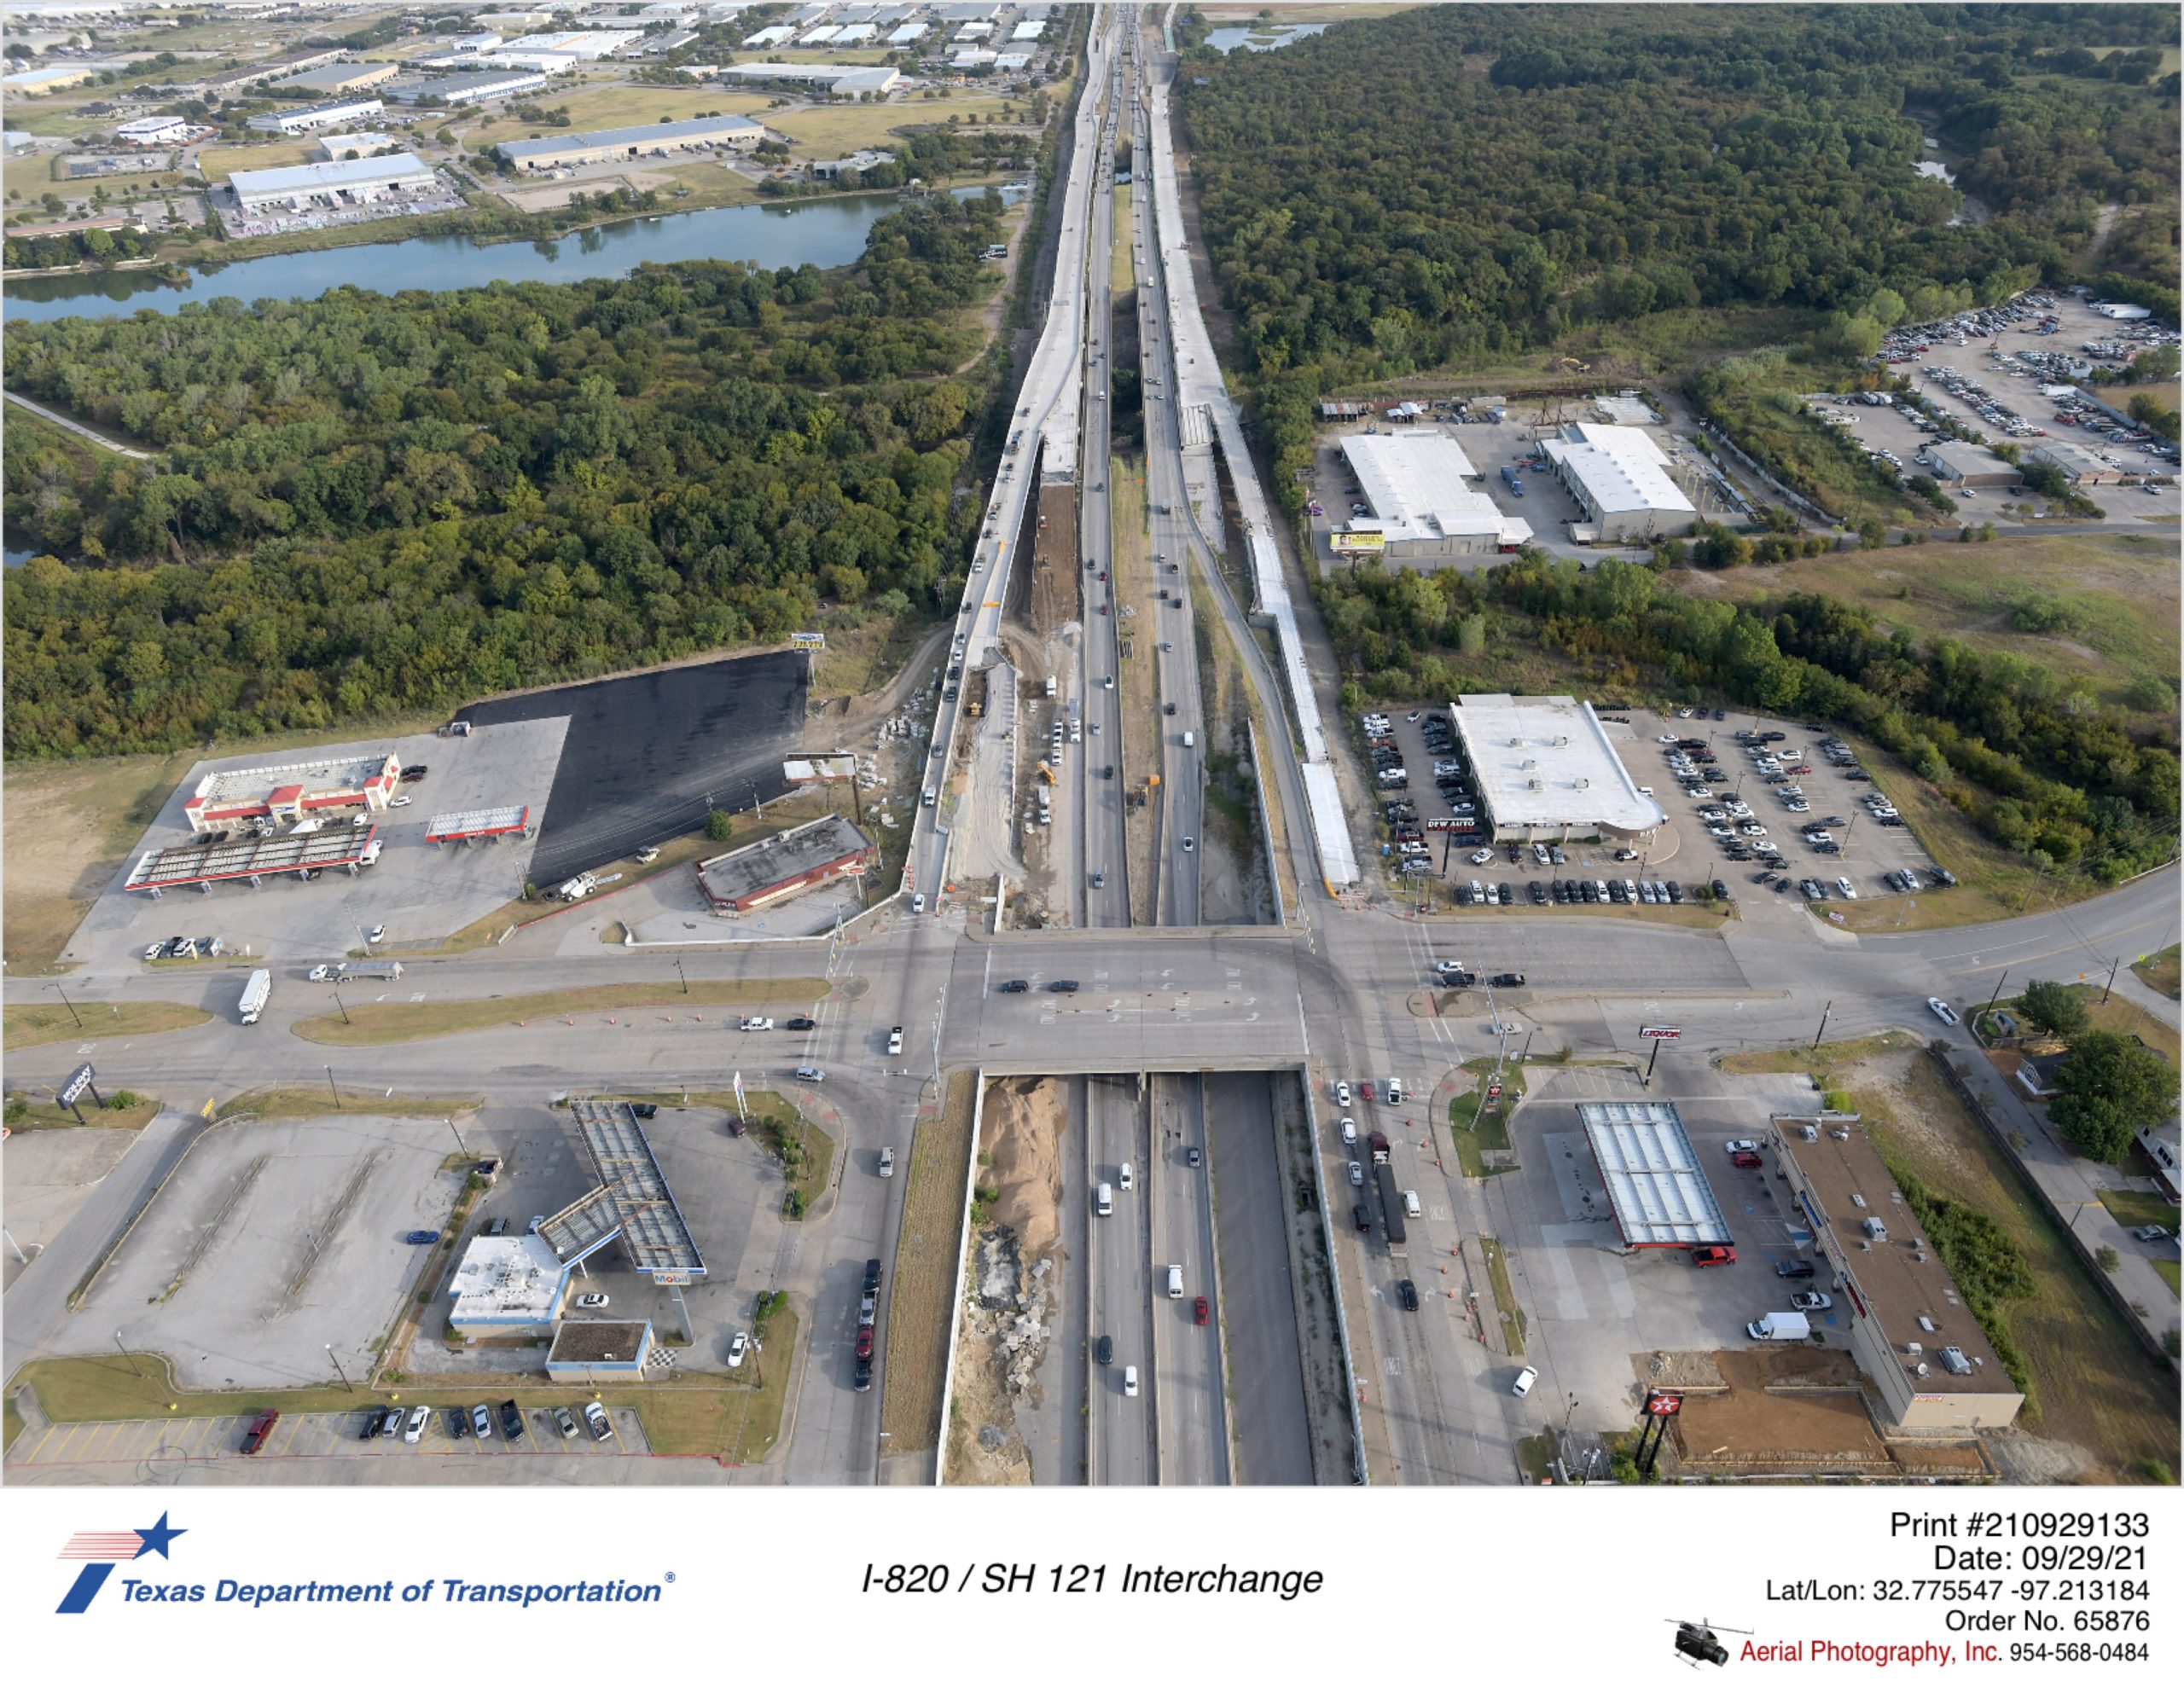 I-820 looking north over Randol Mill Rd interchange shown in foreground. Construction of walls and bridges shown.